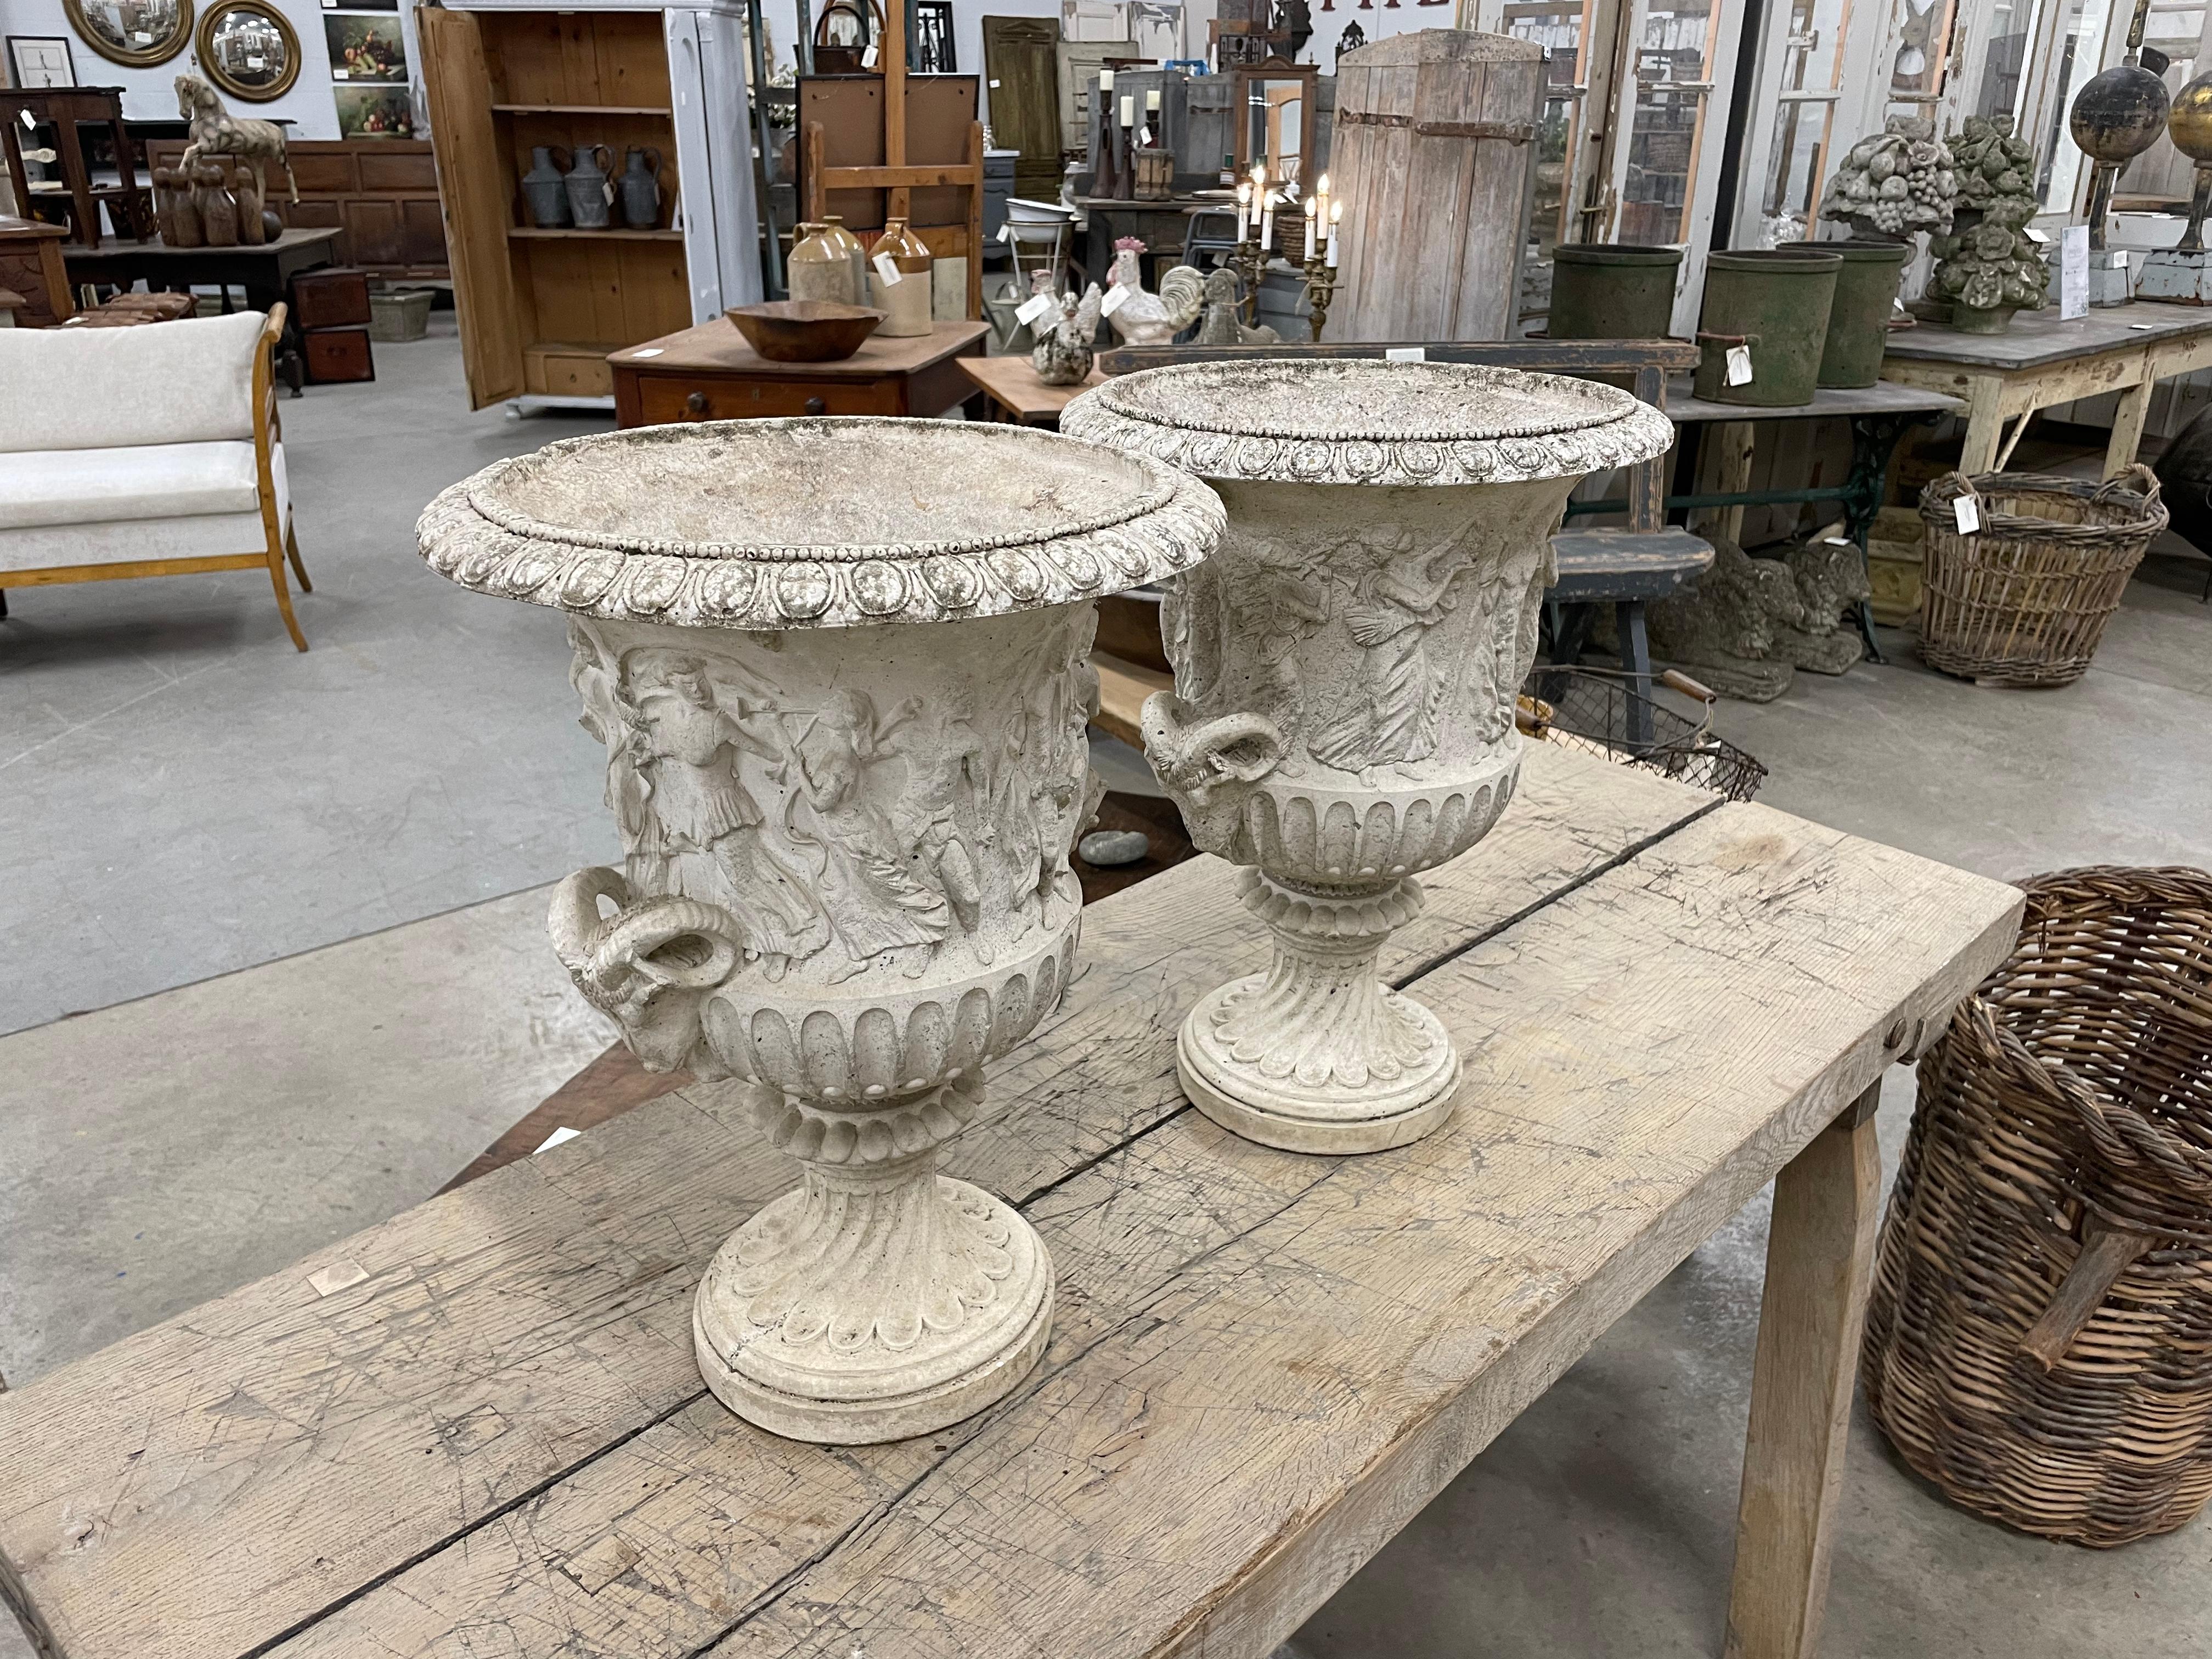 Pair of vintage Renaissance style Medici composite stone campana urns with relief decoration and figural scene, with ram's head handles on a spiral pedestal base.

The history of the original Medici urns dates back to antiquity, as they were